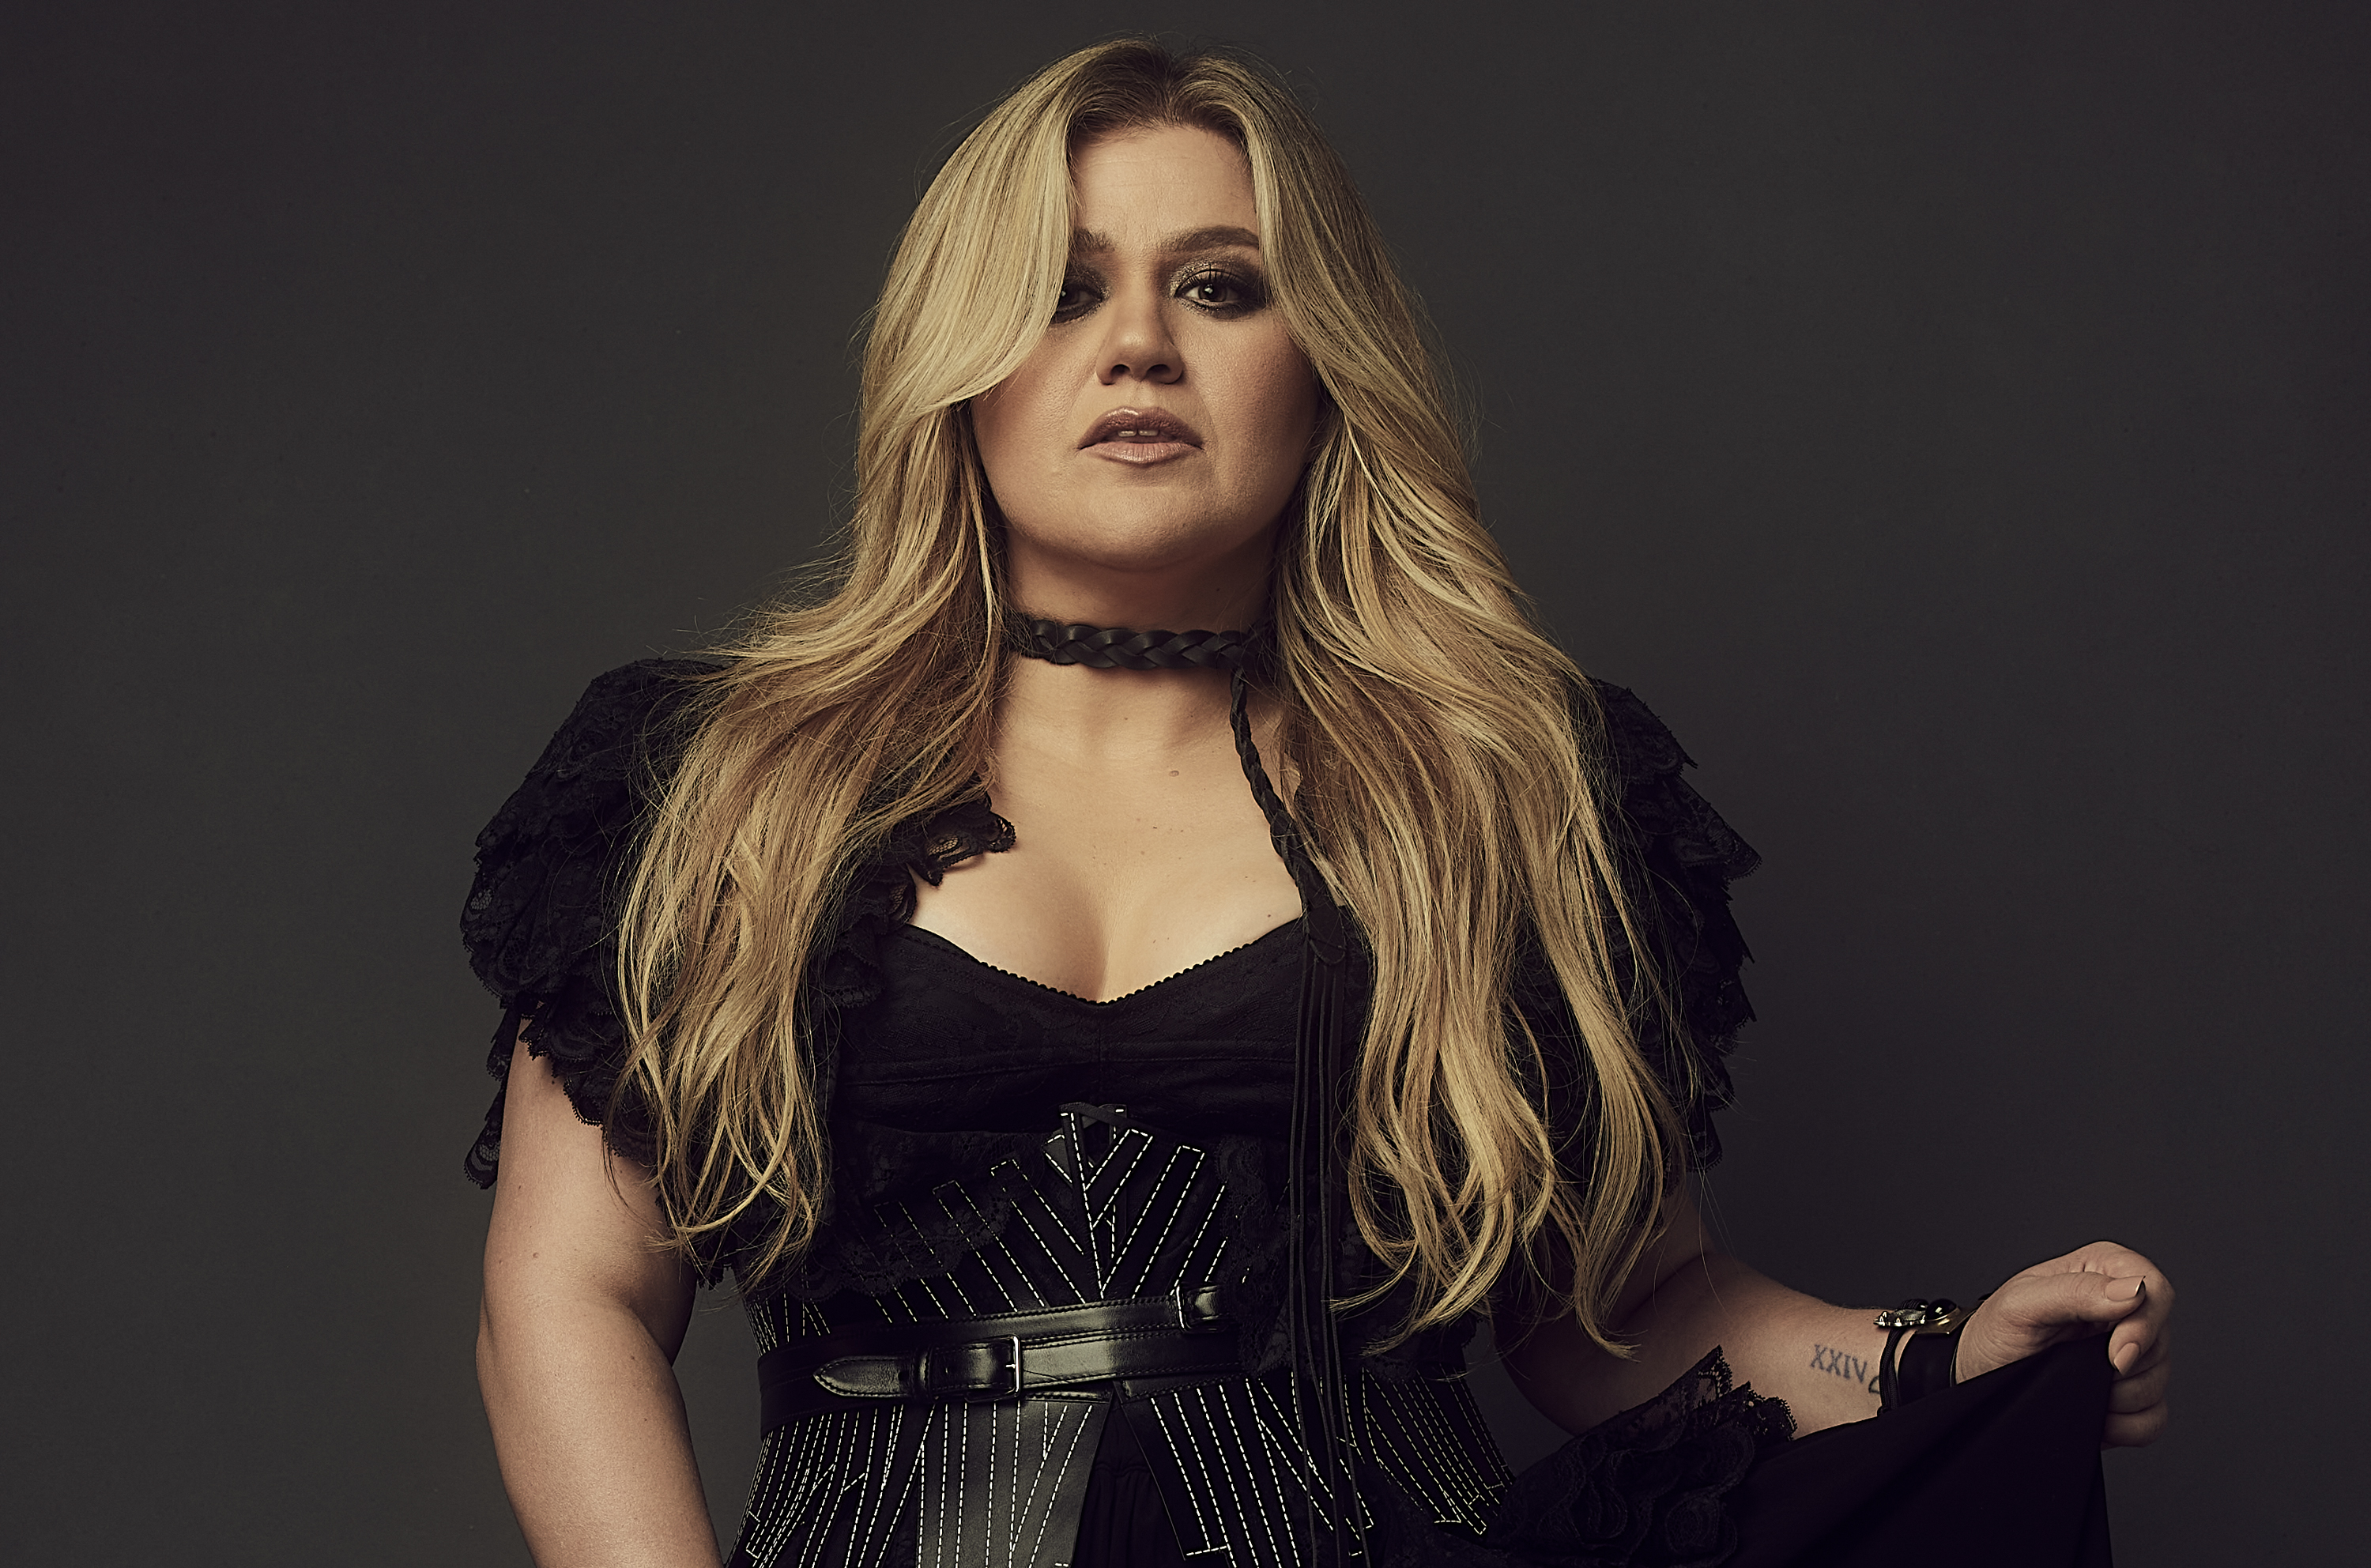 Kelly Clarkson, wearing a black dress, stares into the camera